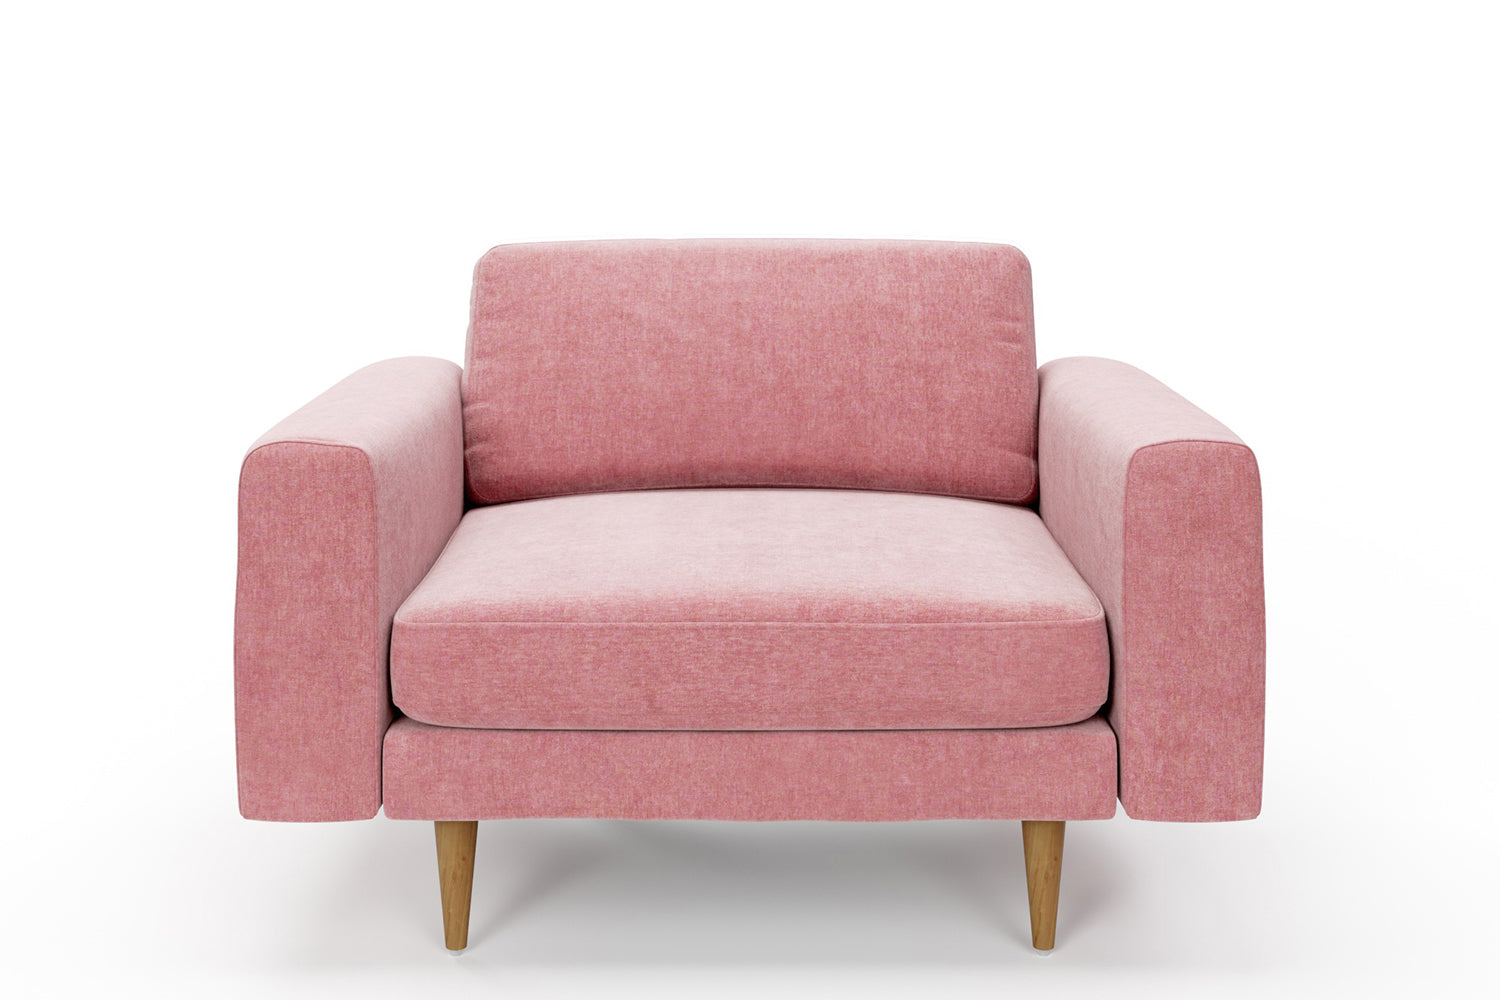 SNUG | The Big Chill 1.5 Seater Snuggler in Blush Coral variant_40621892436016